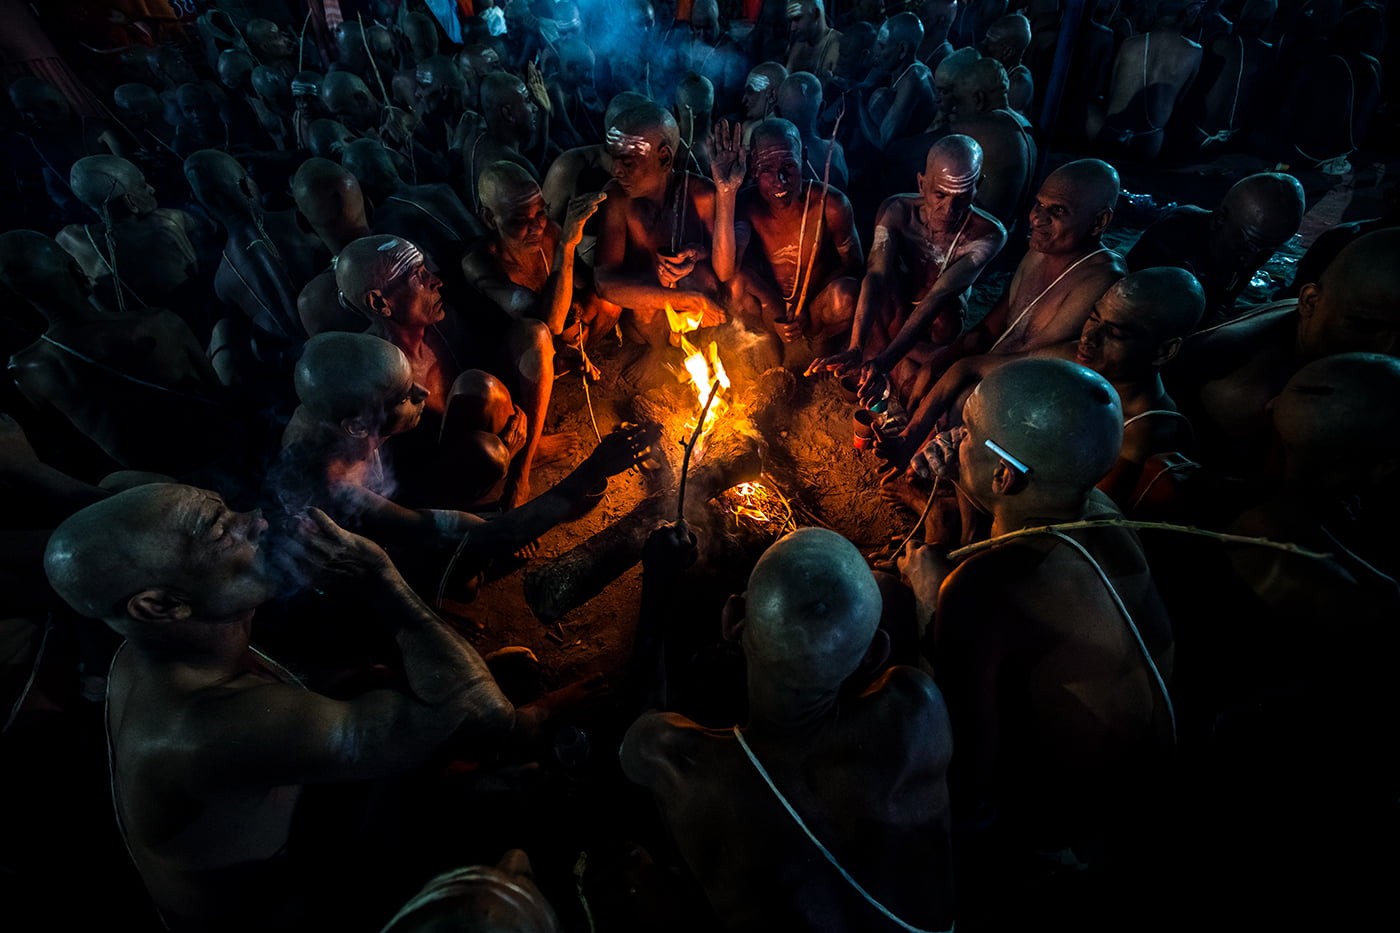 Sadhus of the Juna Akhara, the oldest and largest Akhara, were engaged in a mass initiation ceremony to become Naga Sadhus.